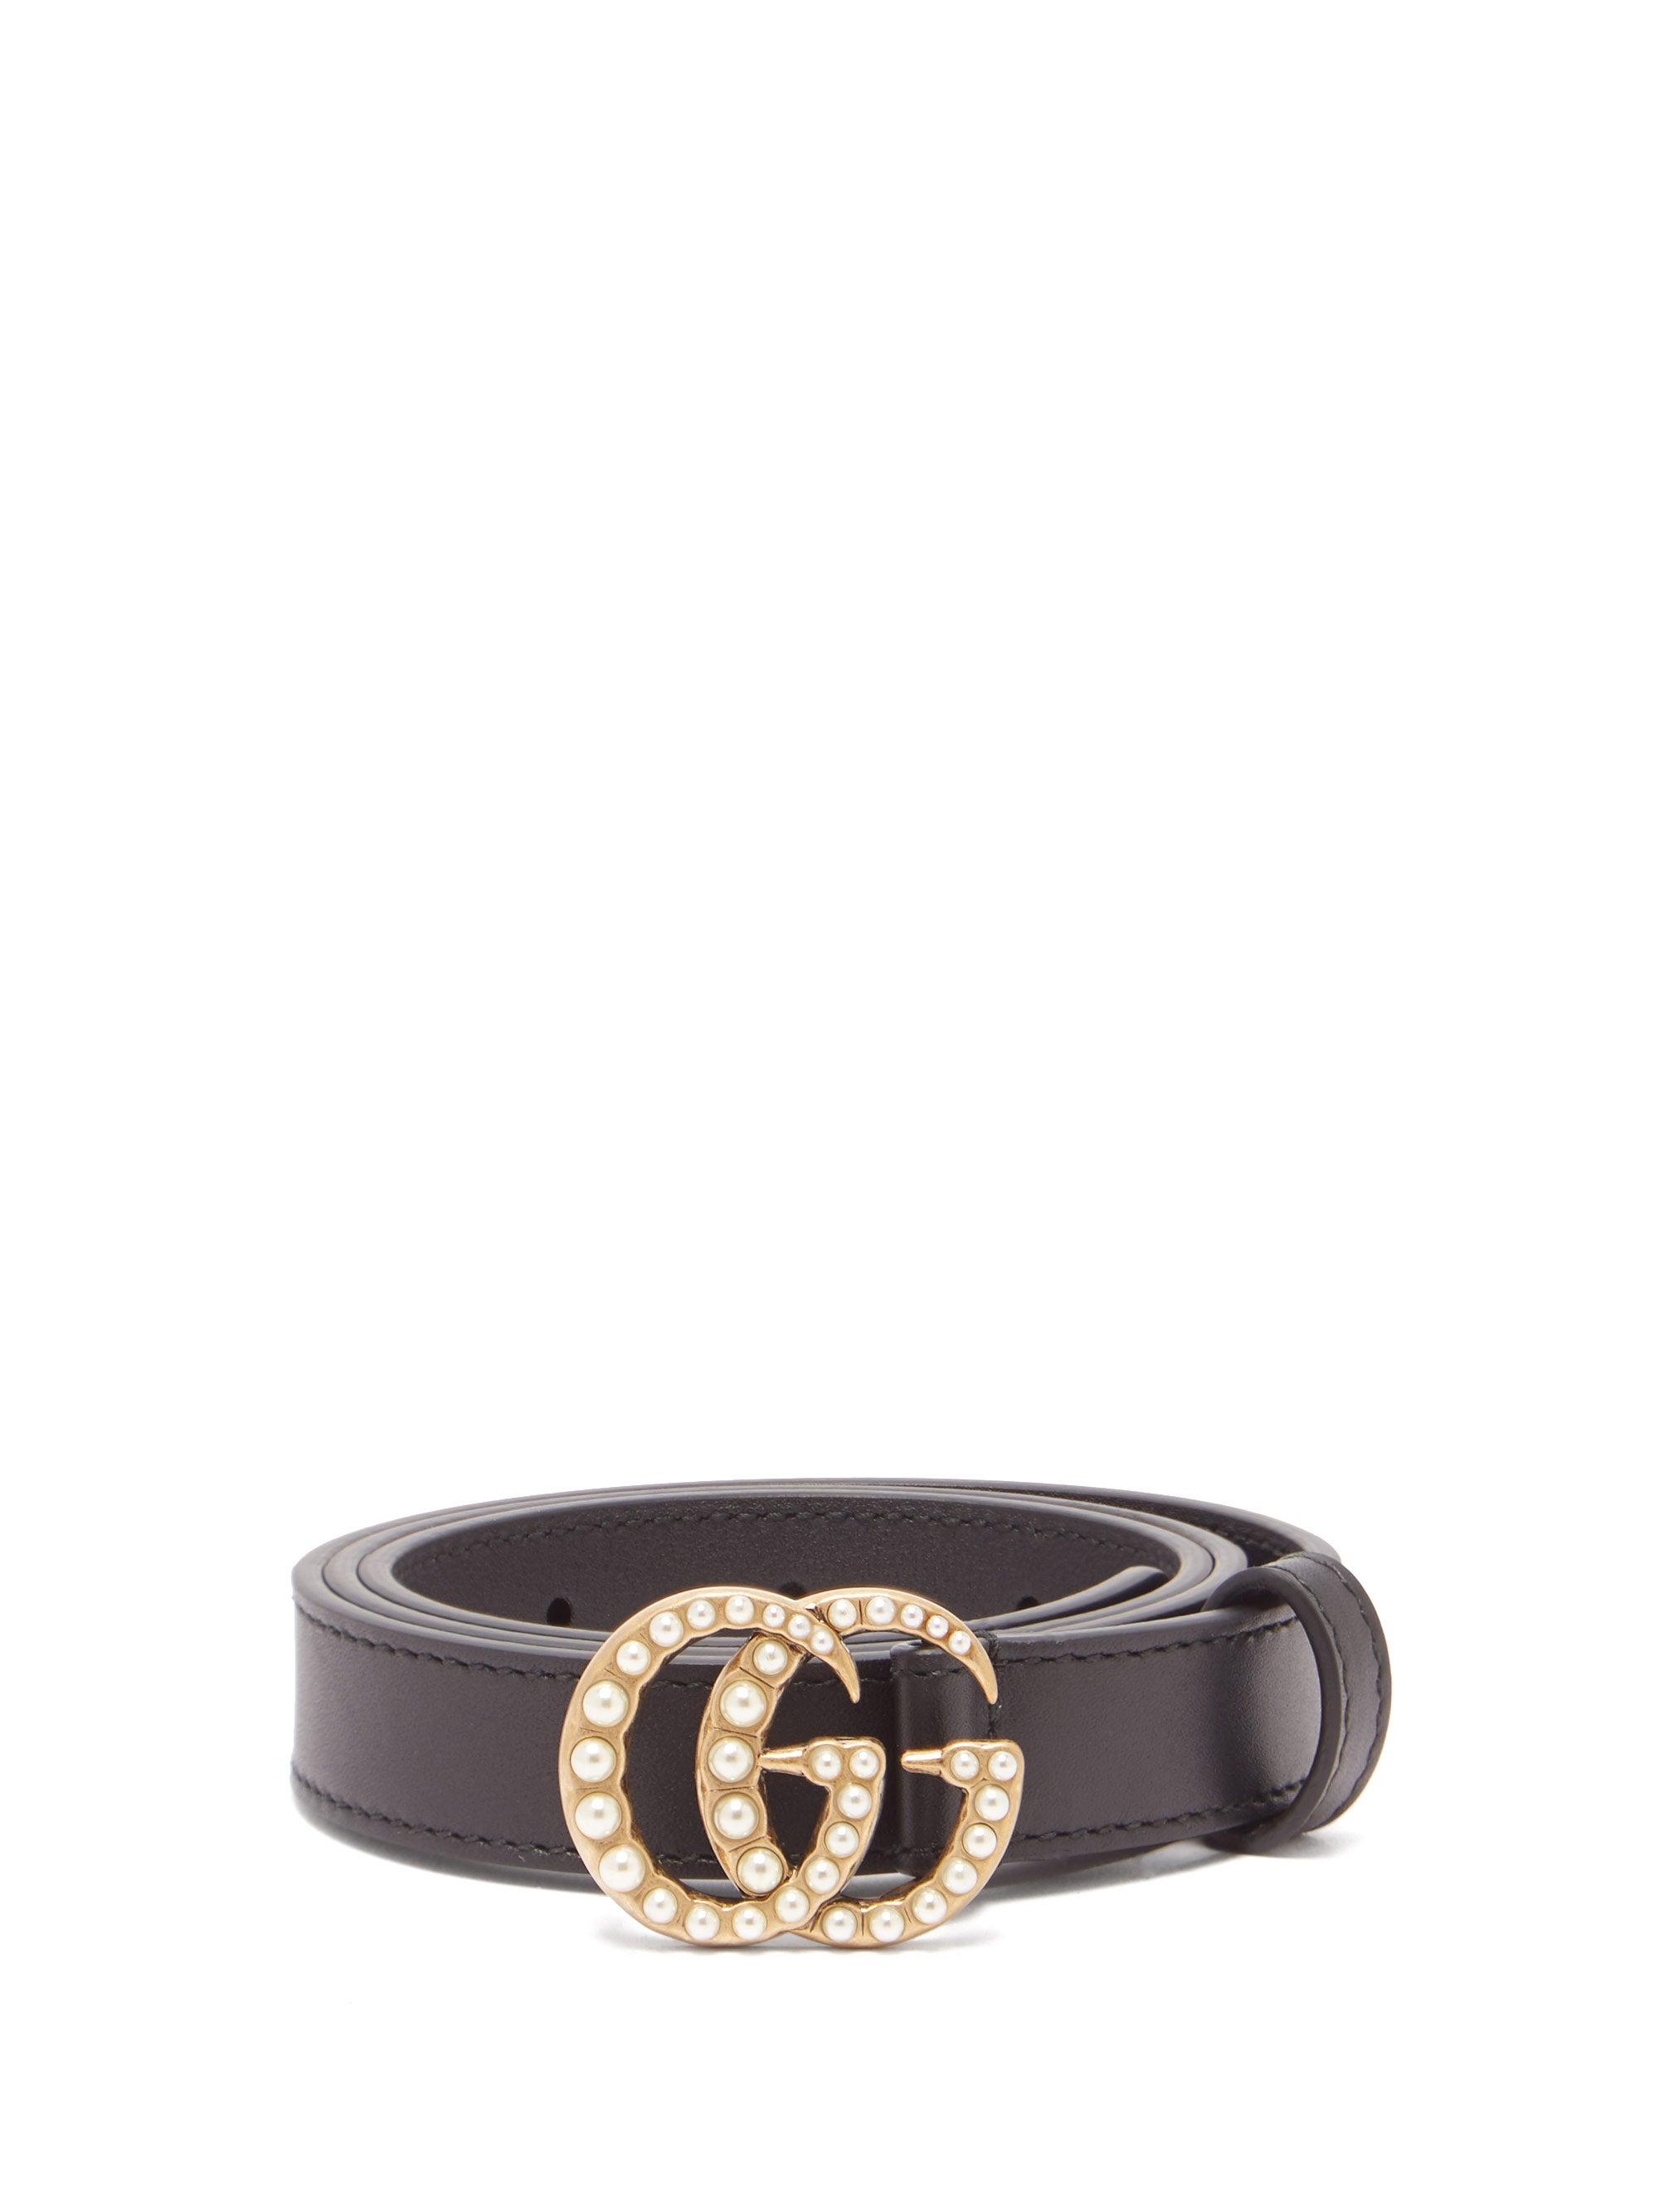 Gucci Leather Belt With Pearl Double G Buckle in Black - Save 63% - Lyst